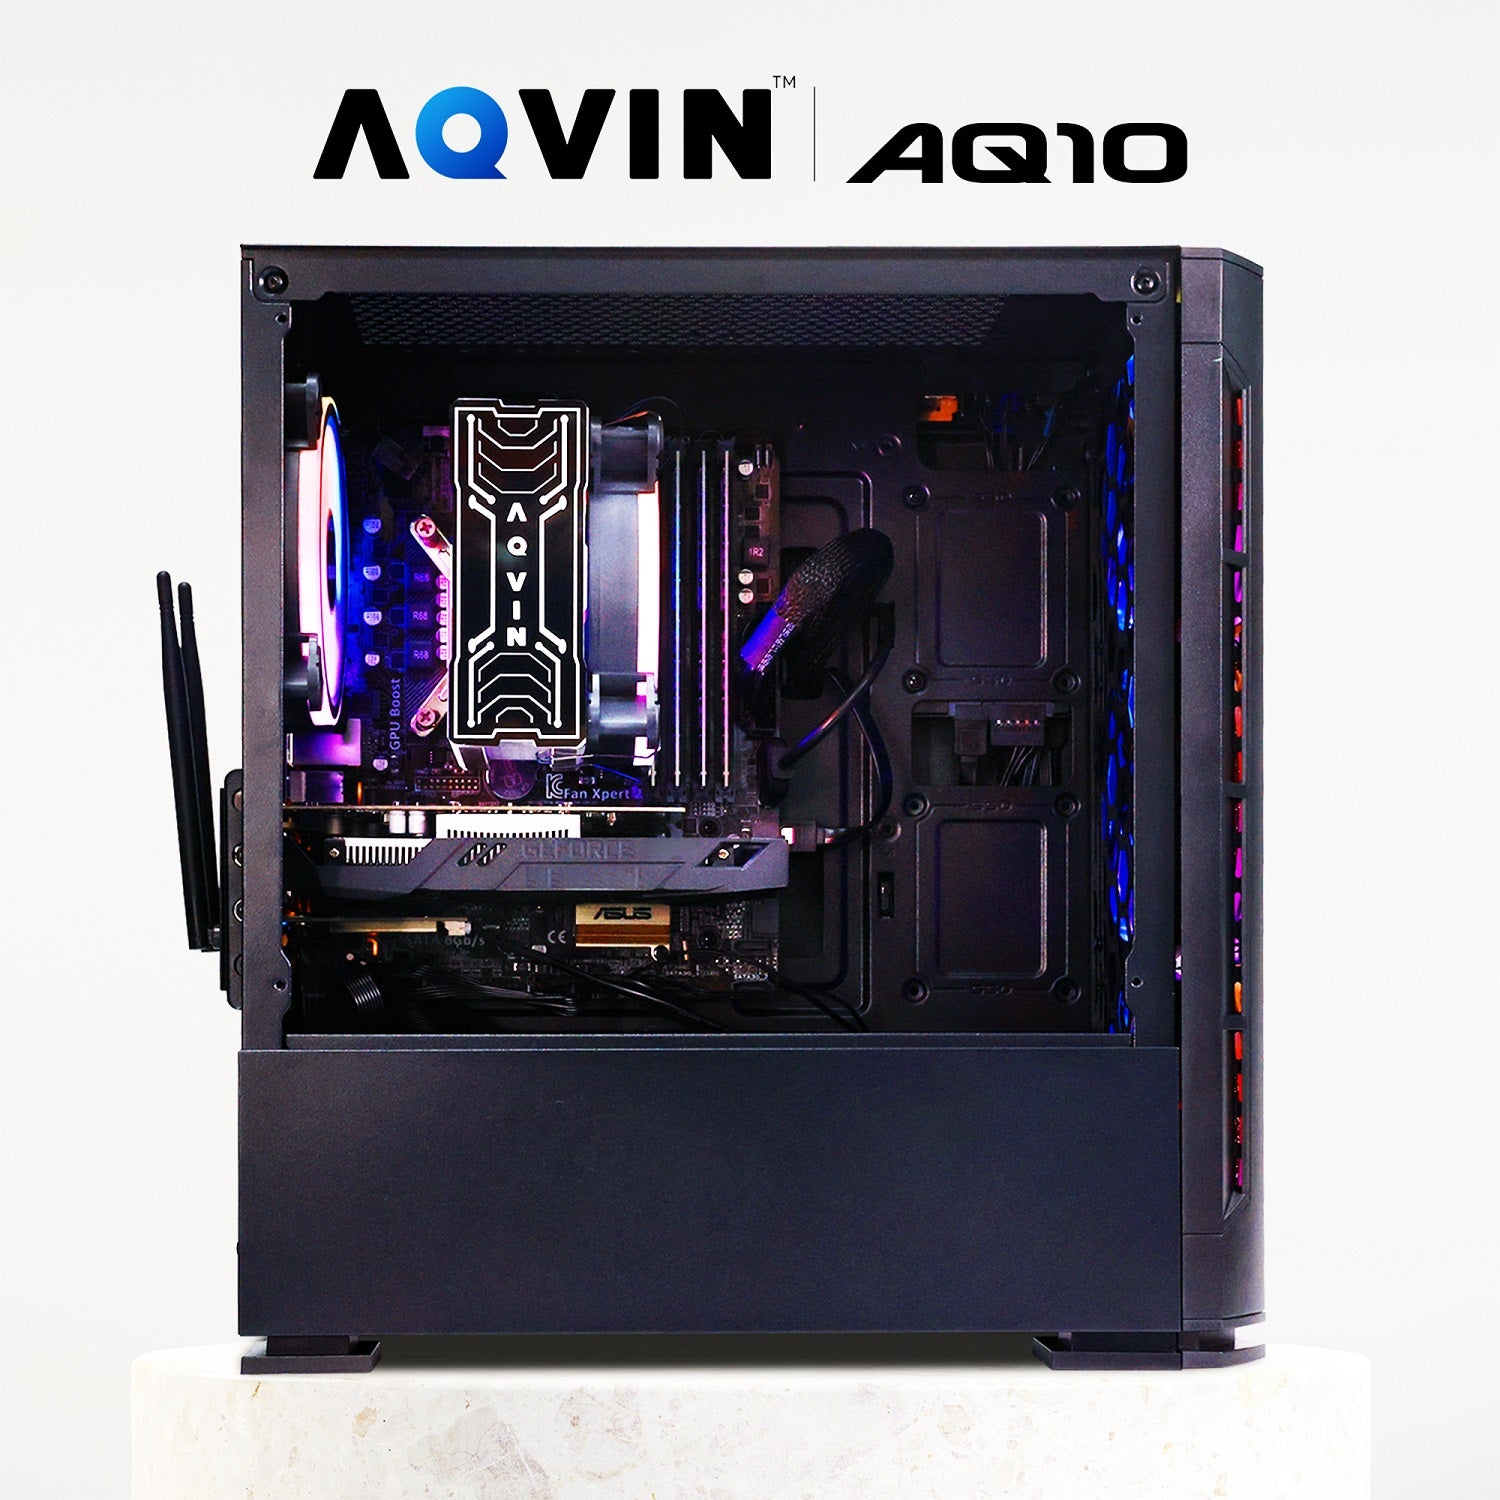 AQVIN AQ10 Gaming Desktop Computer Combo Tower | RGB Fan Lights | Core i7 CPU up to 4.00 GHz | 32GB DDR4 RAM | 1TB - 2TB SSD | RX 580, GTX 1050Ti, 1630, 1650, 1660s | Windows 10 Pro | Gaming Keyboard and Mouse